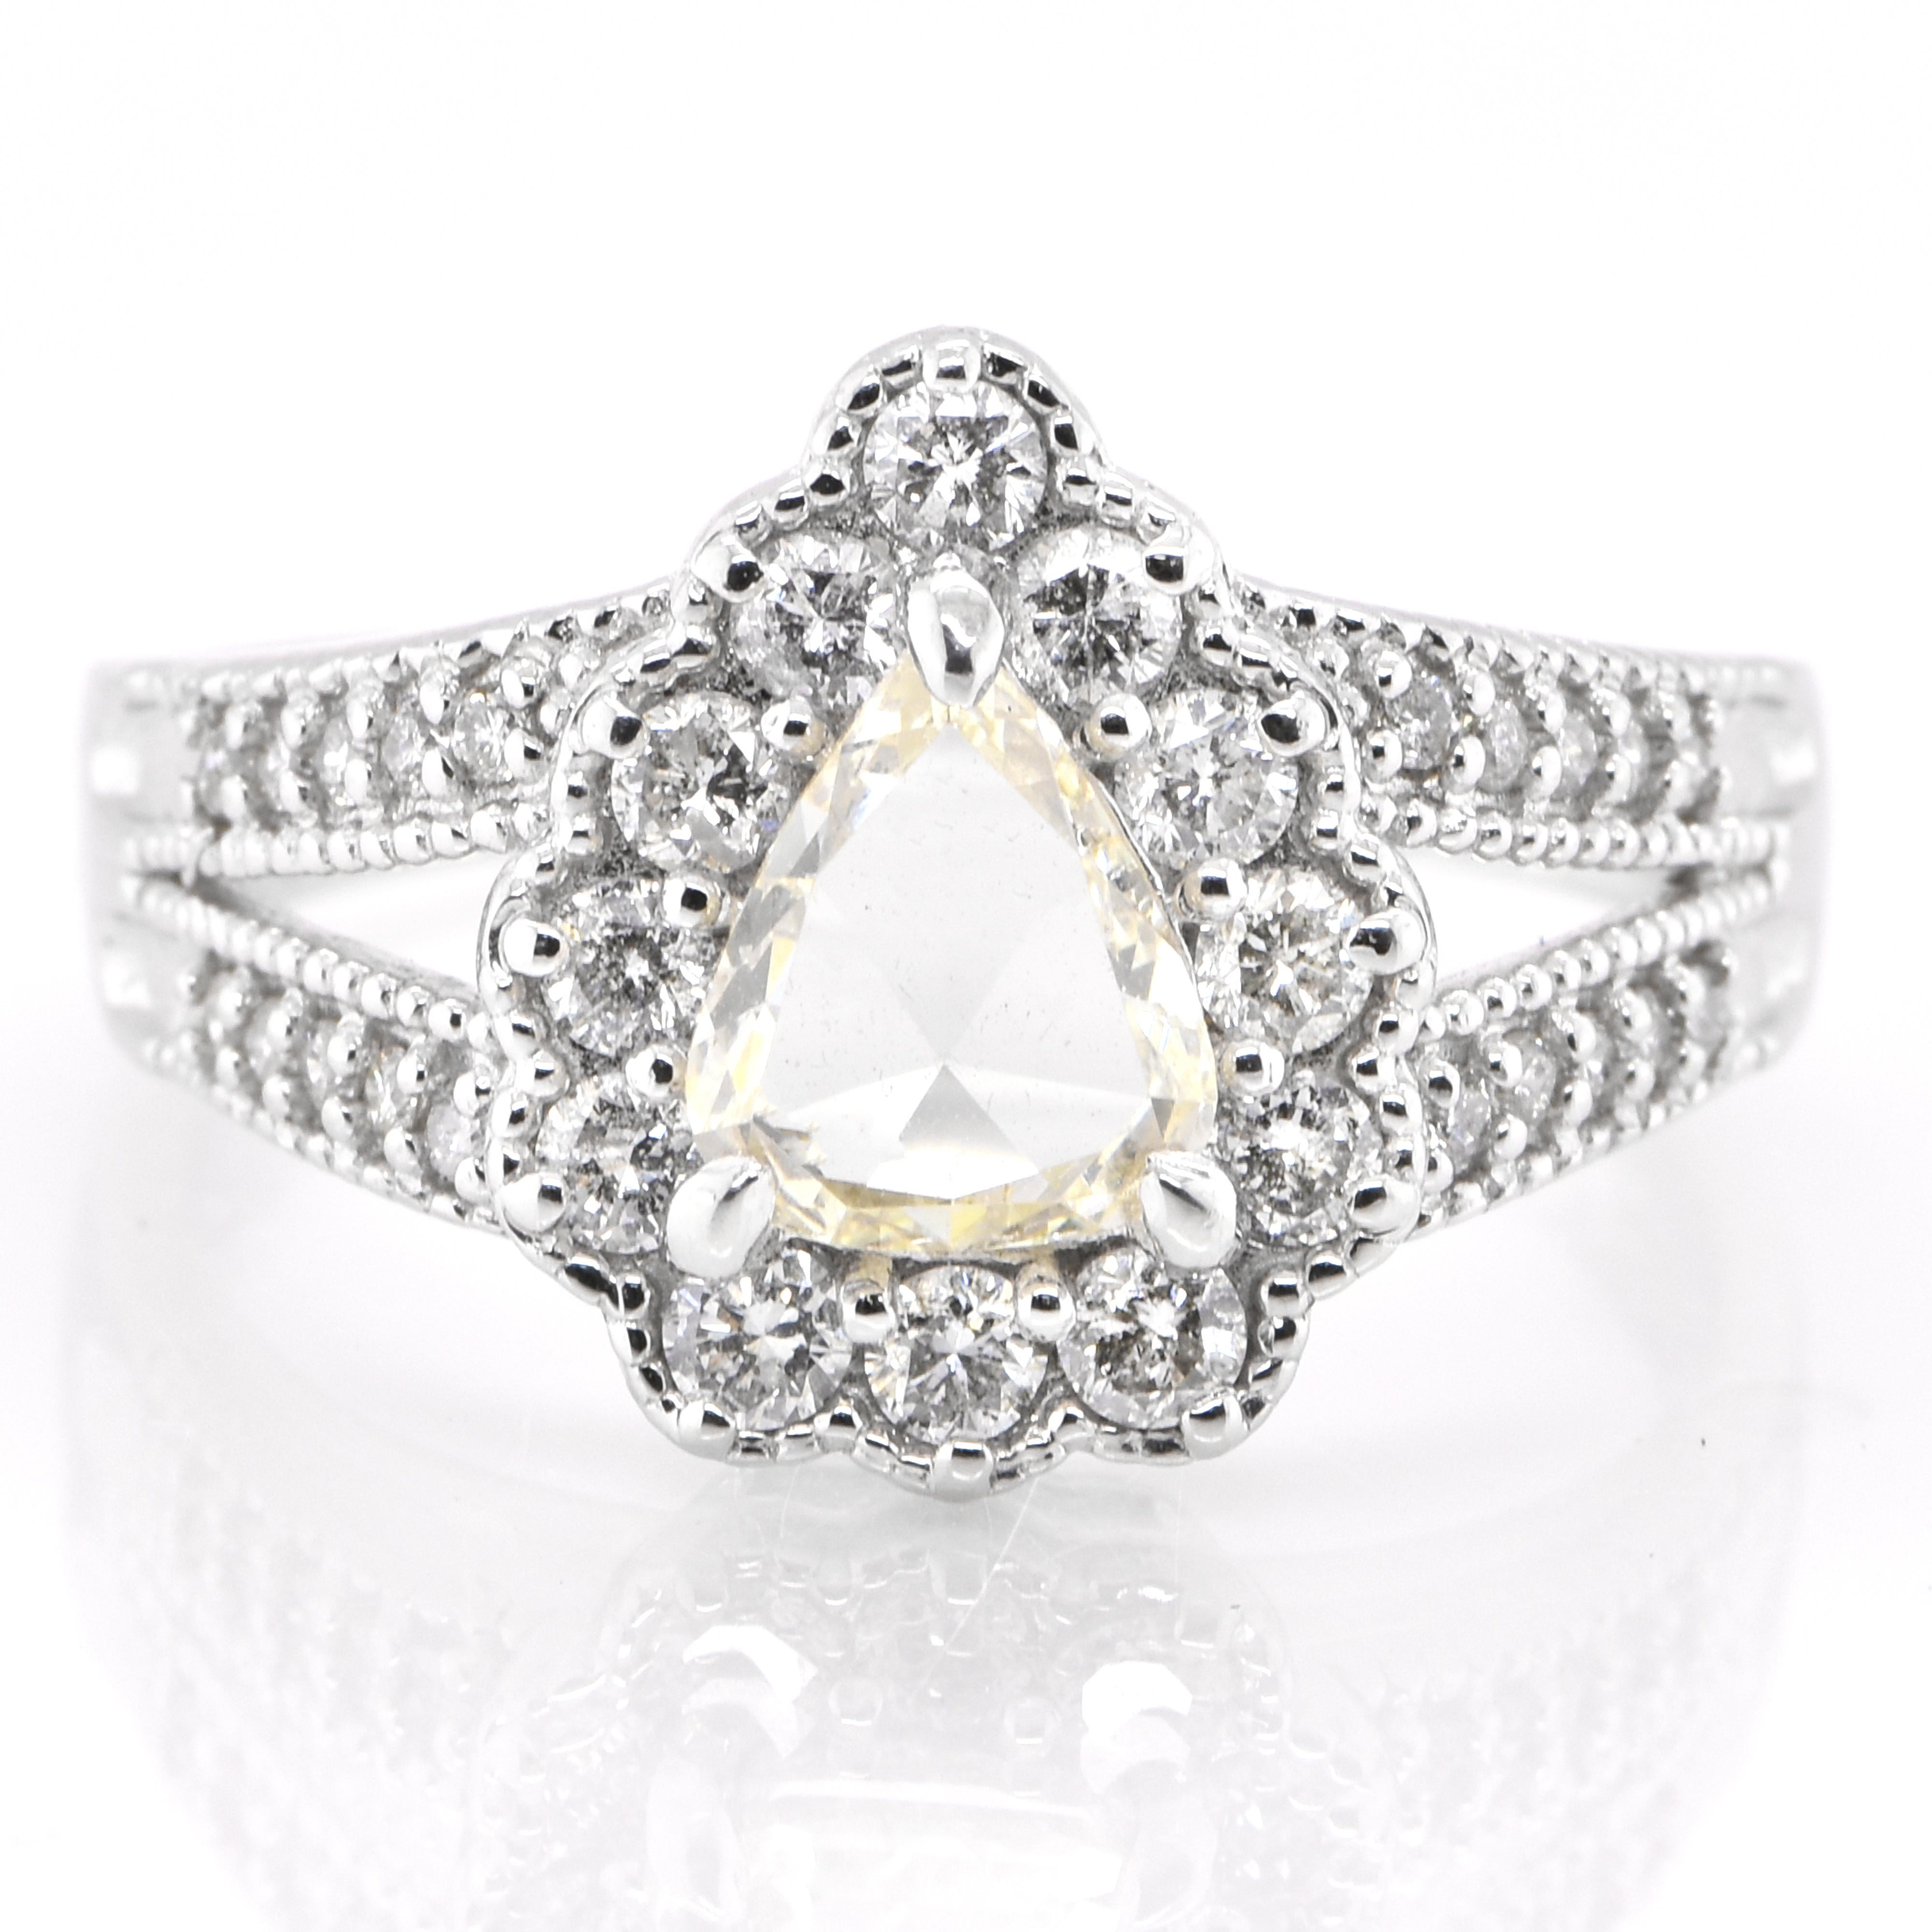 A beautiful halo ring featuring a 0.73 Carat Natural Rose Cut Diamond and 0.54 Carats Diamond accents Ring set in Platinum. Diamonds have been adorned and cherished throughout human history and date back to thousands of years. They are rated as 10